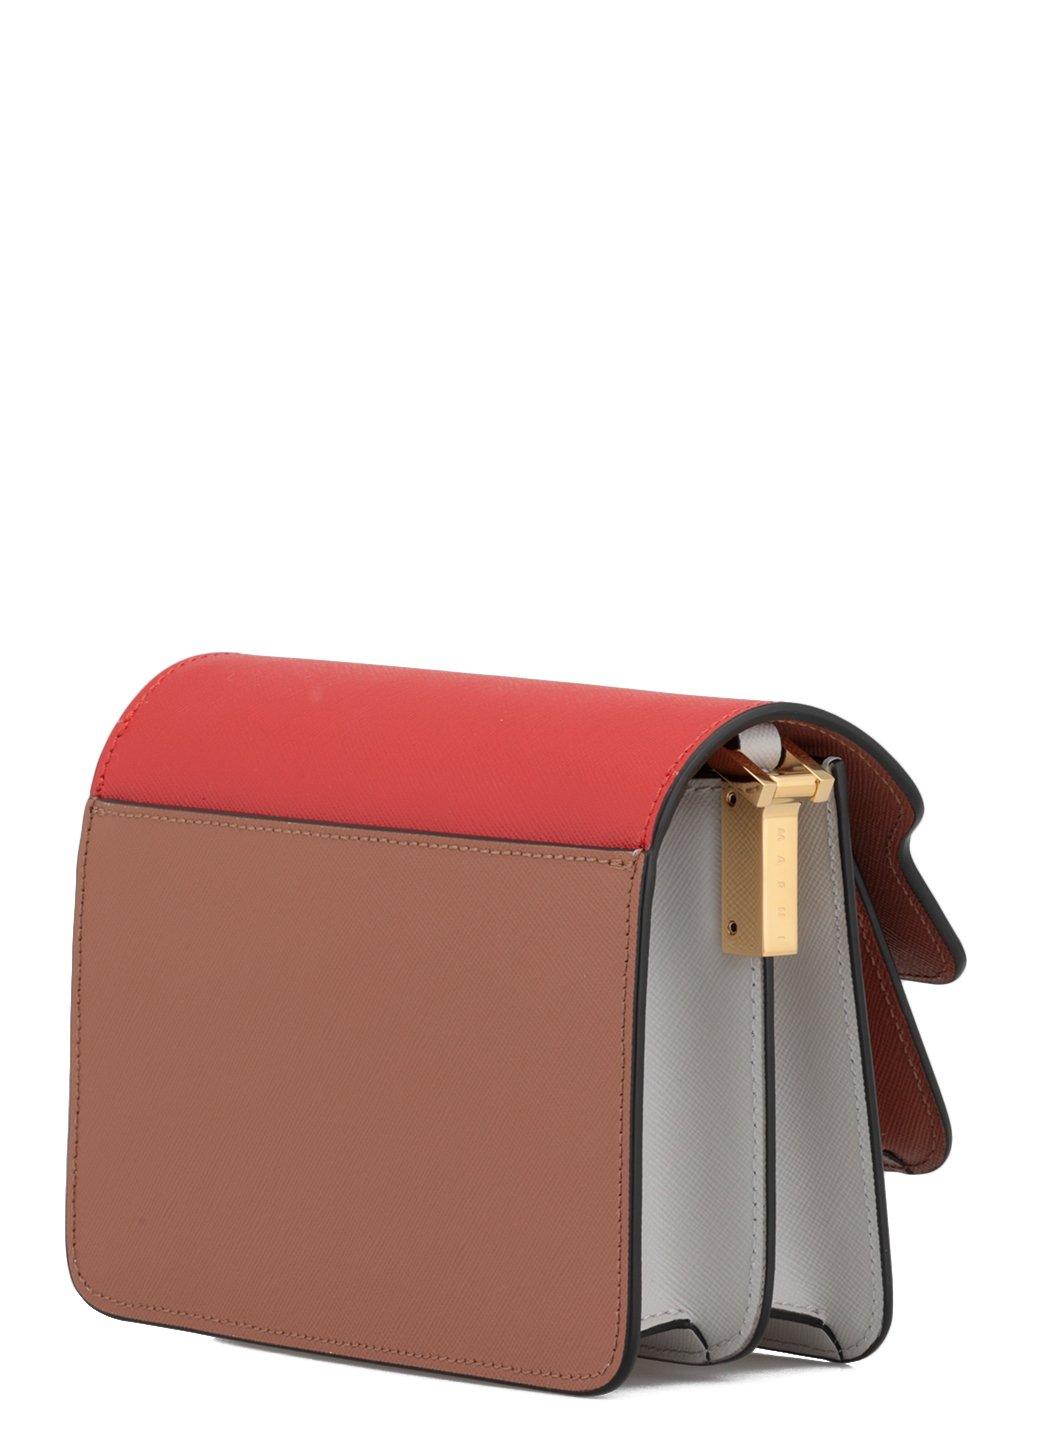 Marni Leather Trunk Bag in Red - Save 17% - Lyst